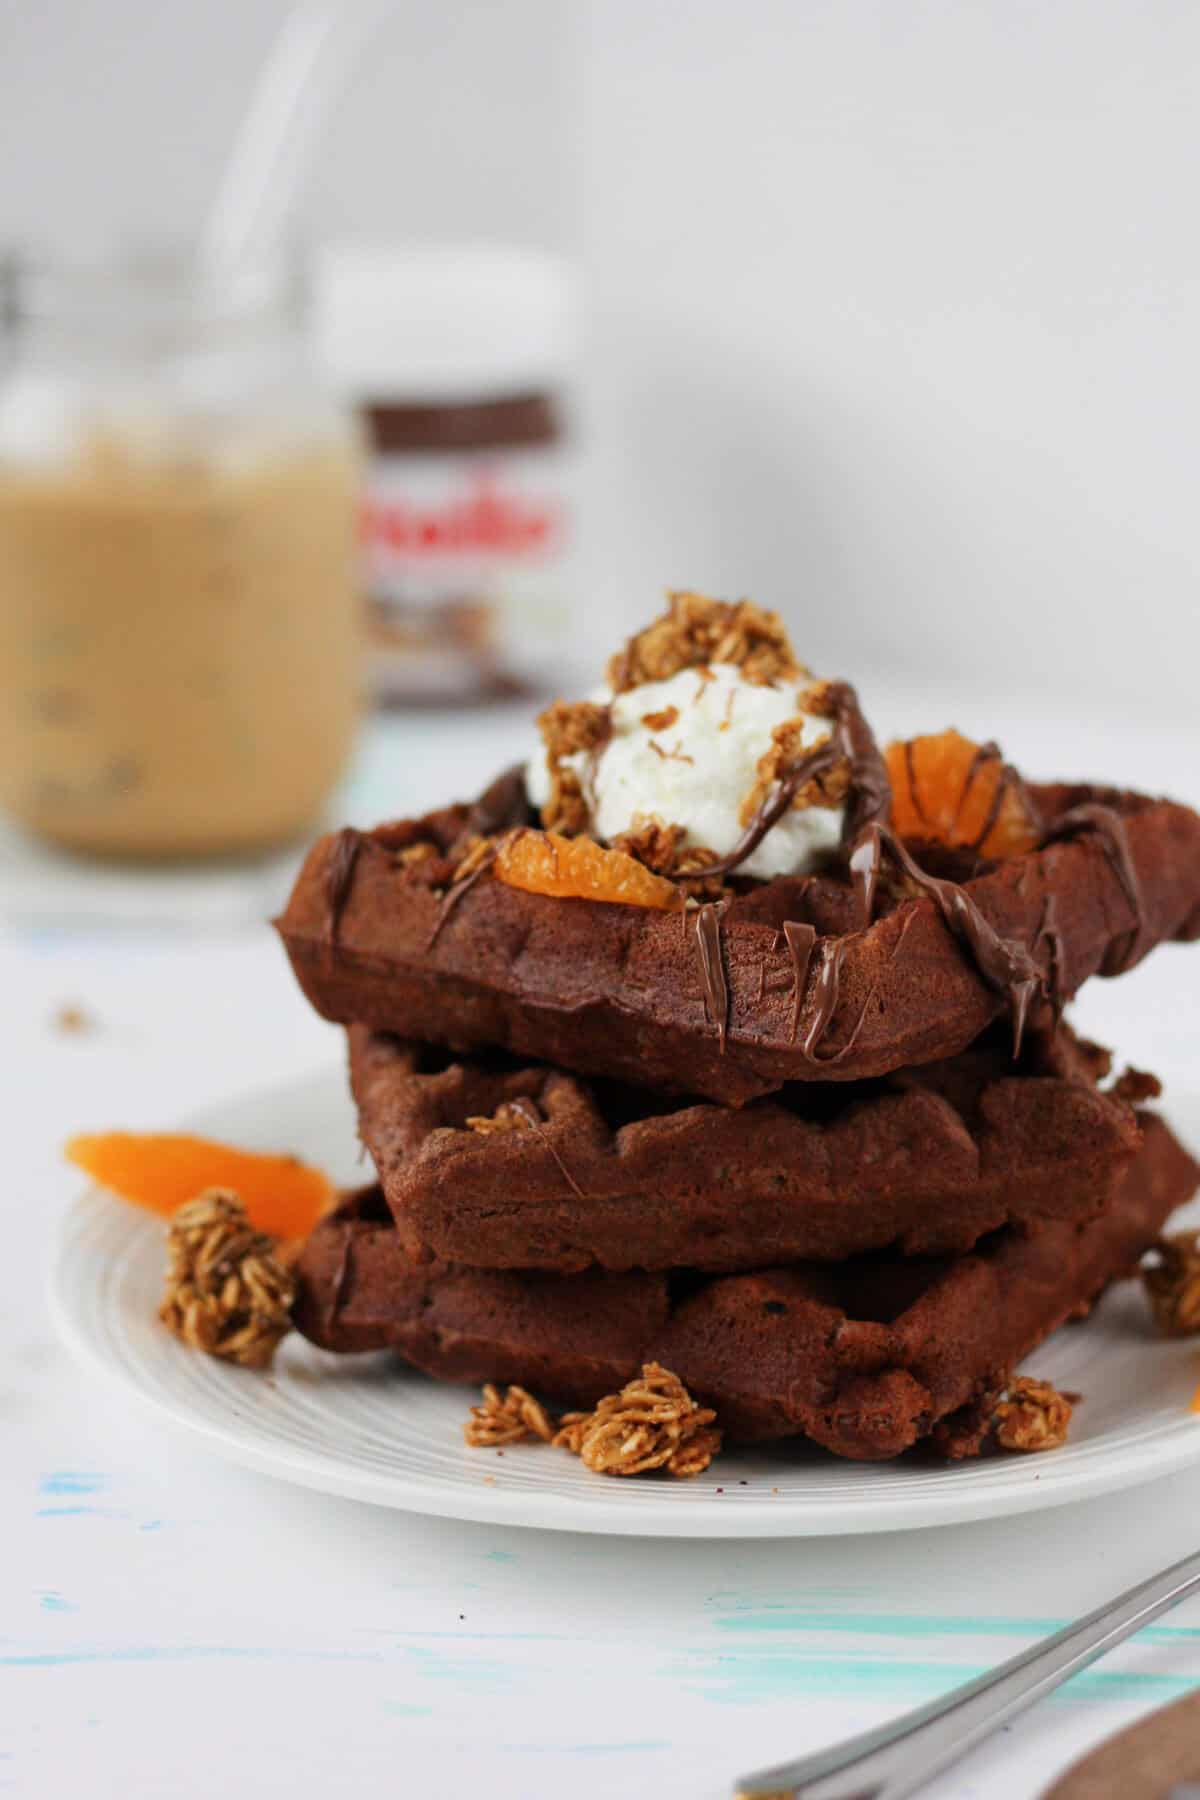 Stack of brown waffles with Nutella dripping off them and topped with a scoop of yogurt, orange slices and granola. There's a cup of ice coffee and a jar of Nutella in the background.